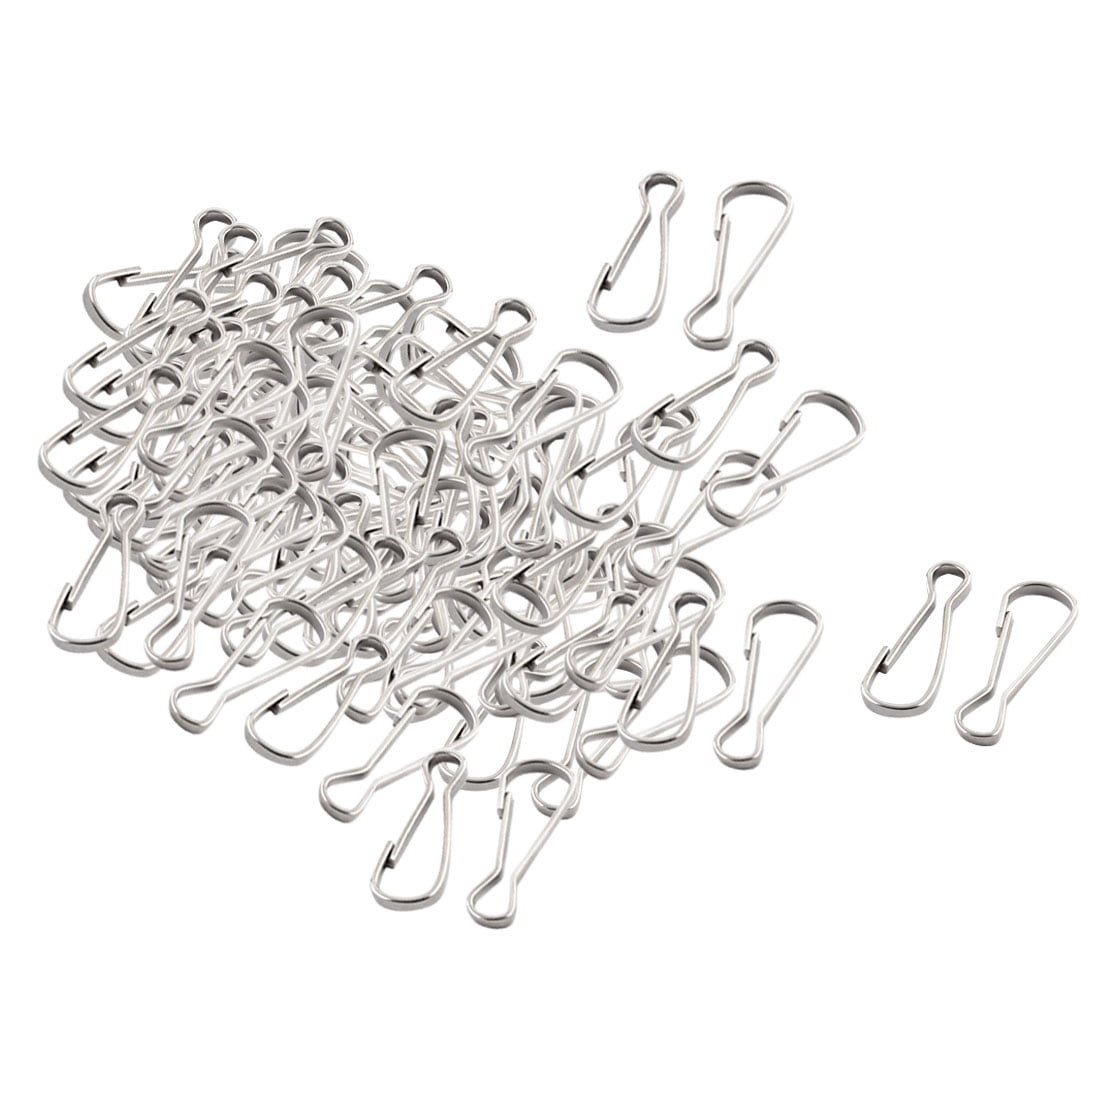 BQLZR 100Pieces 304 Stainless Steel Lanyard Clip Hook Buckle Clasp Snap 20mm 